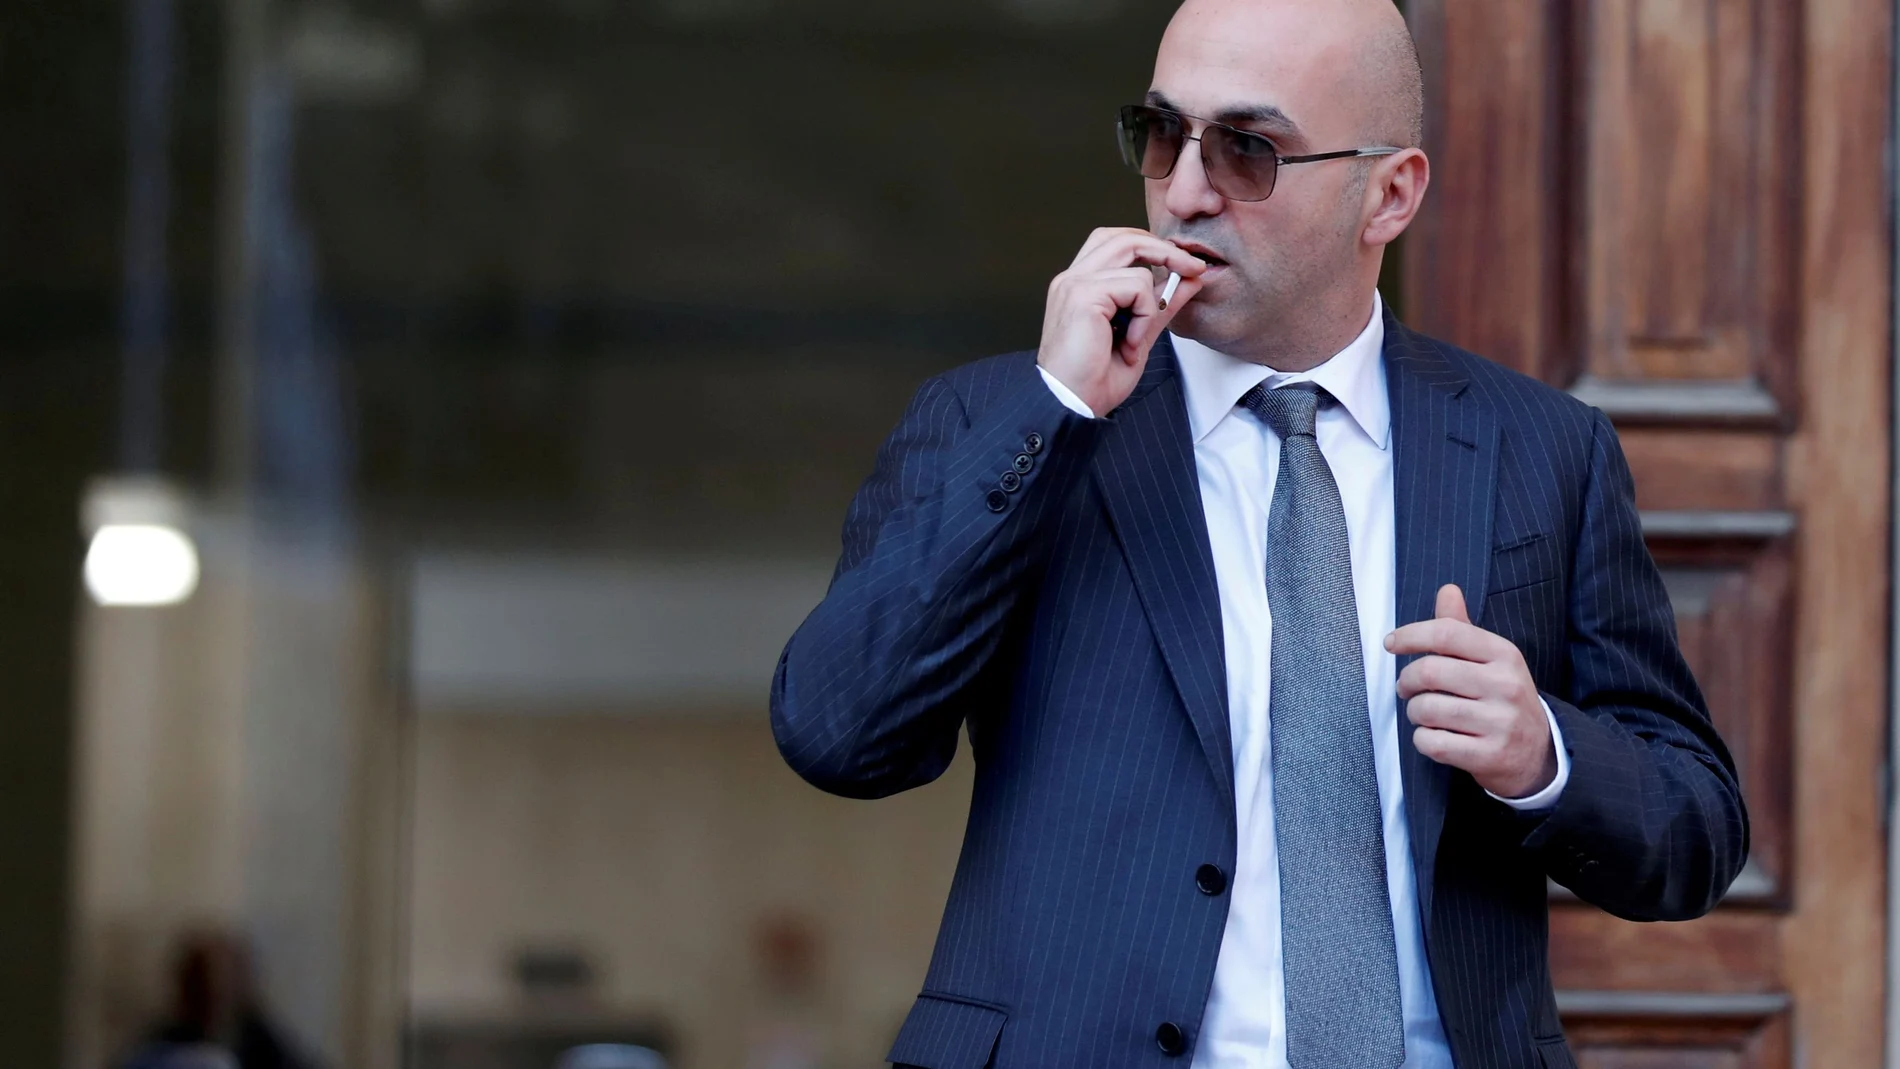 FILE PHOTO: Maltese businessman Yorgen Fenech, who was arrested in connection with an investigation into the murder of journalist Daphne Caruana Galizia, leaves the Courts of Justice in Valletta